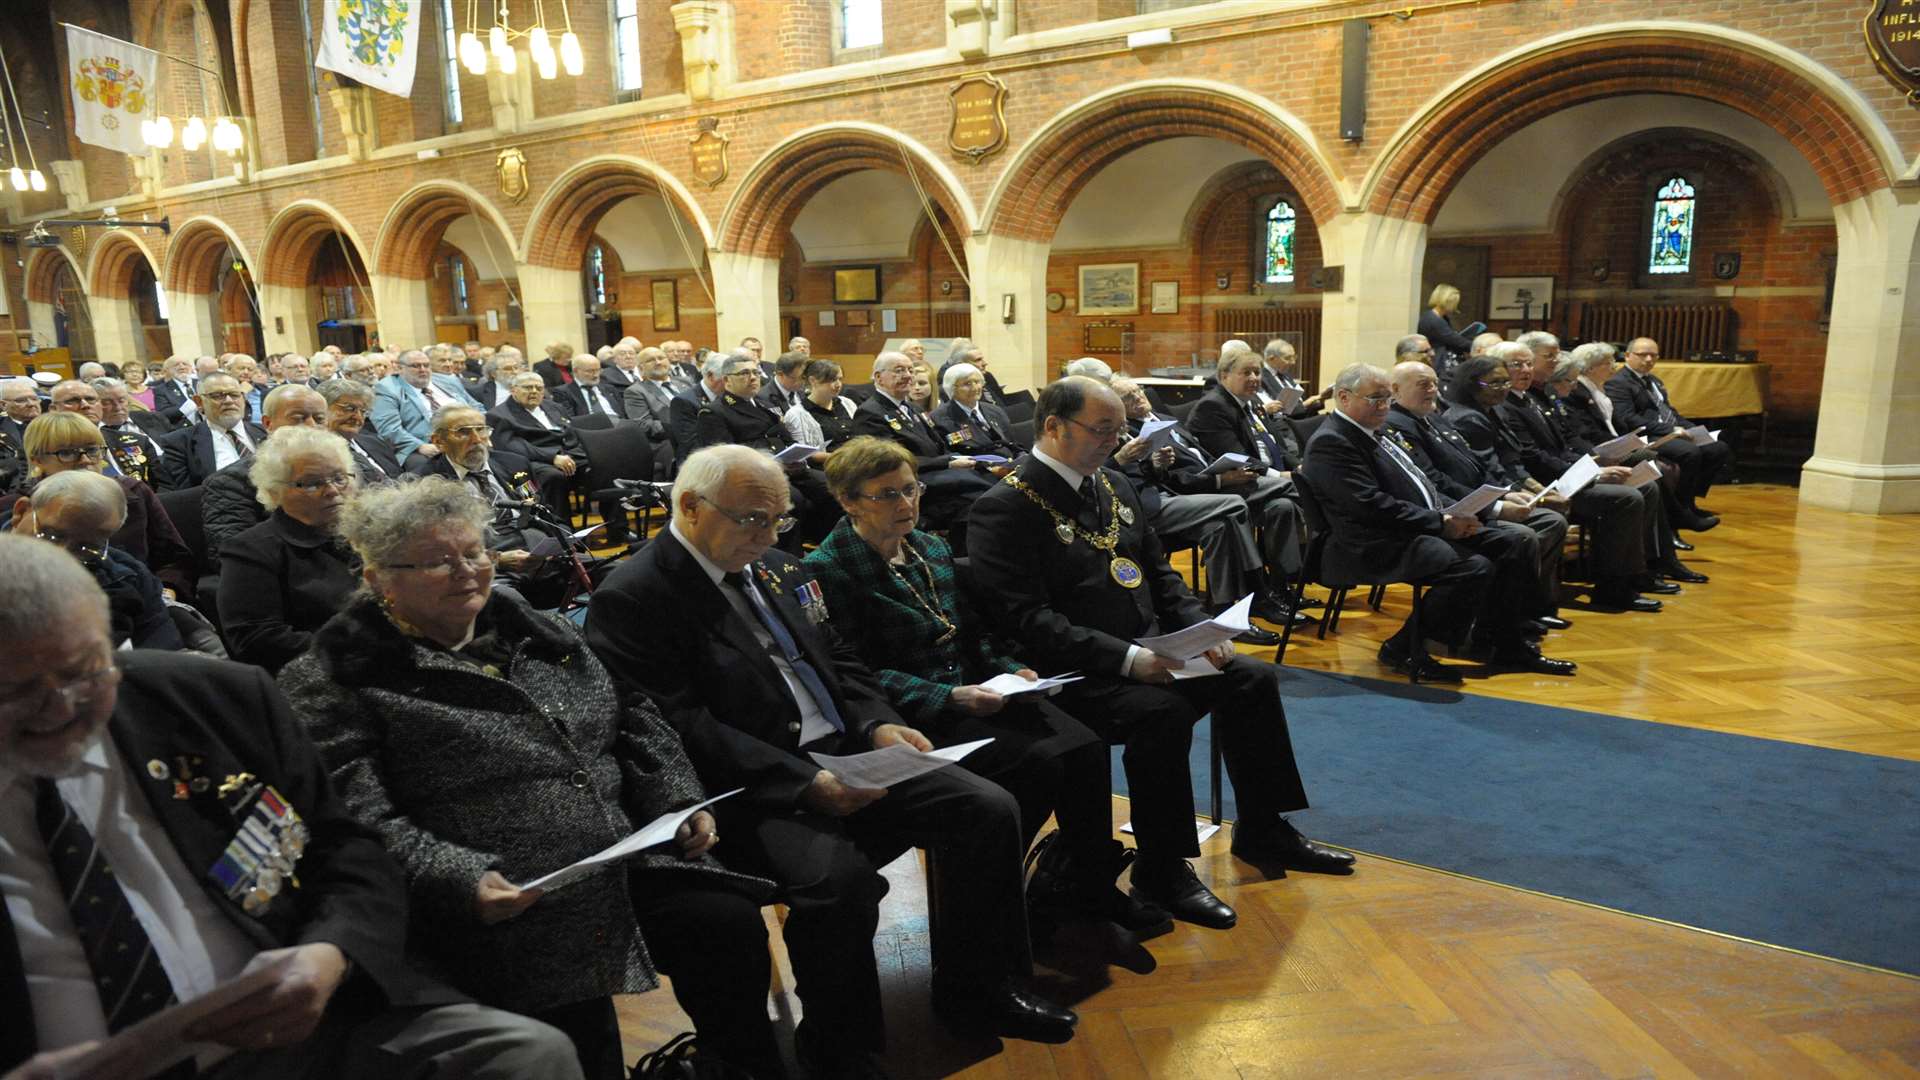 Nearly 230 people attended the service at the St George's Centre on Saturday.